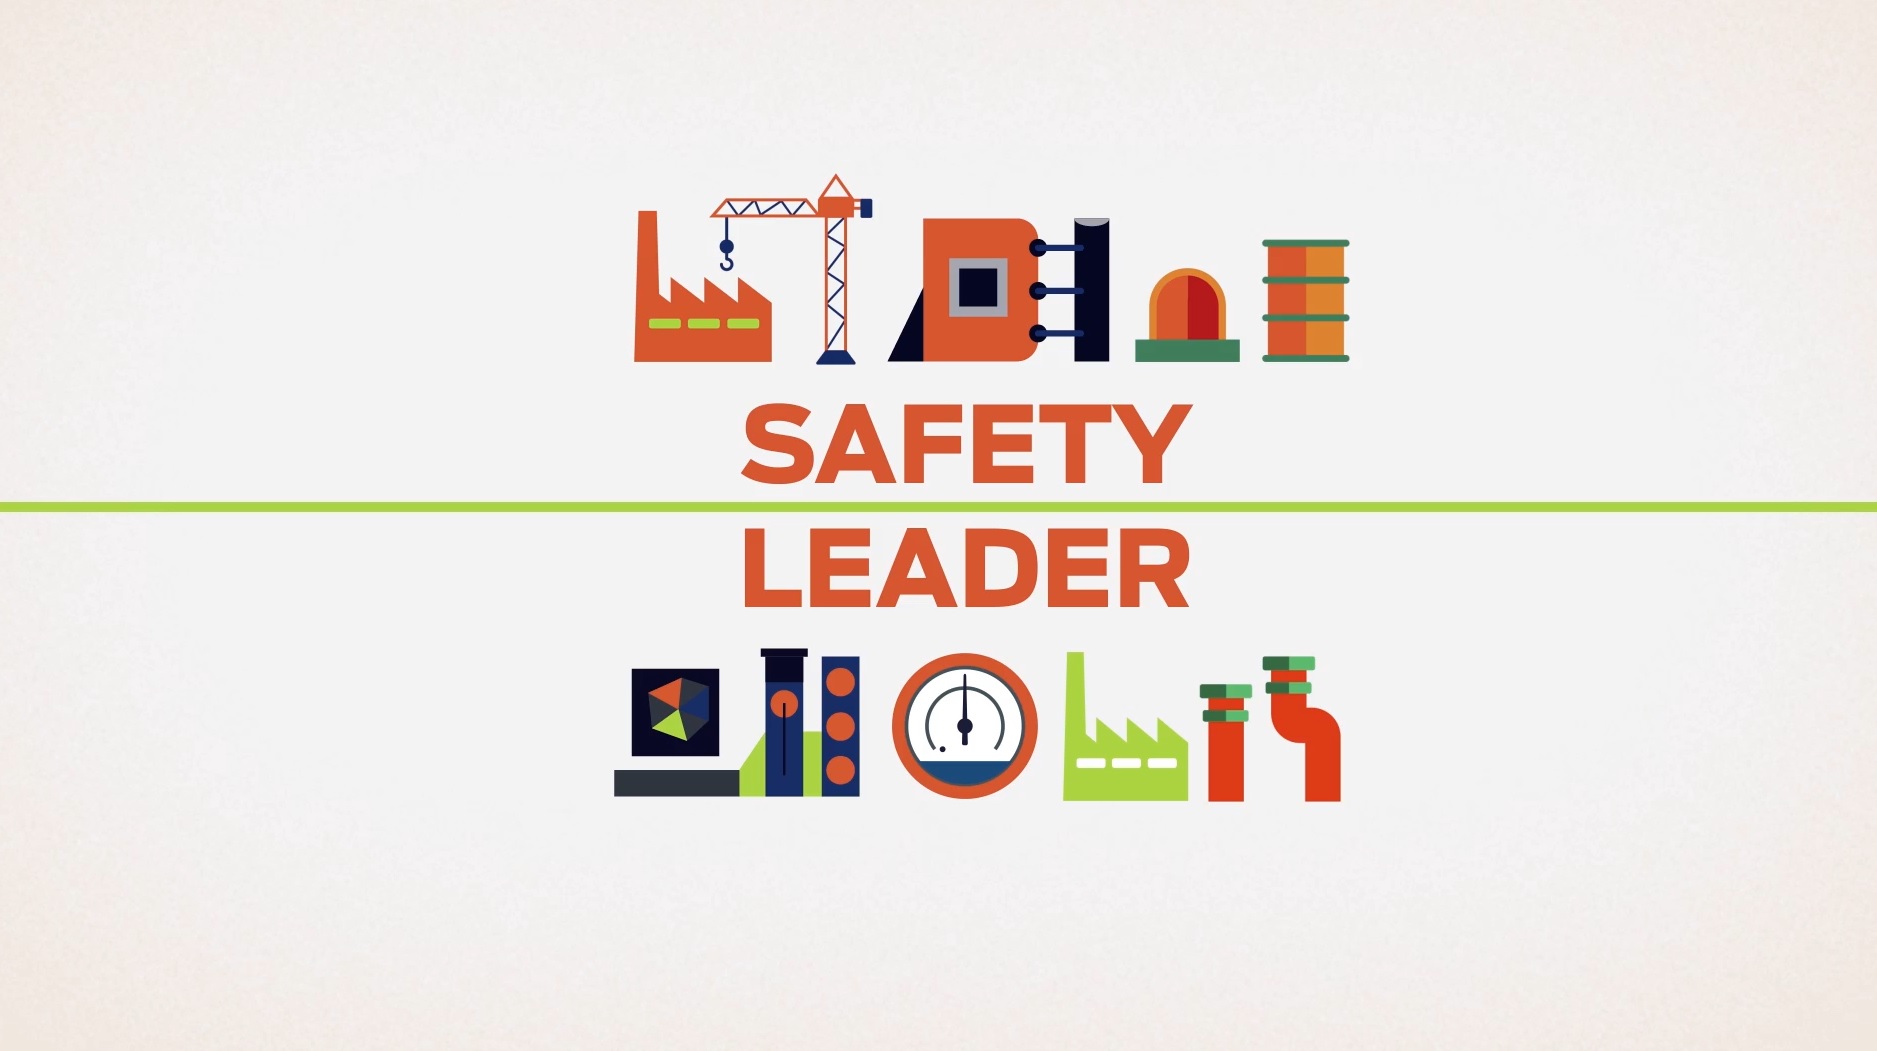 Leadership in safety